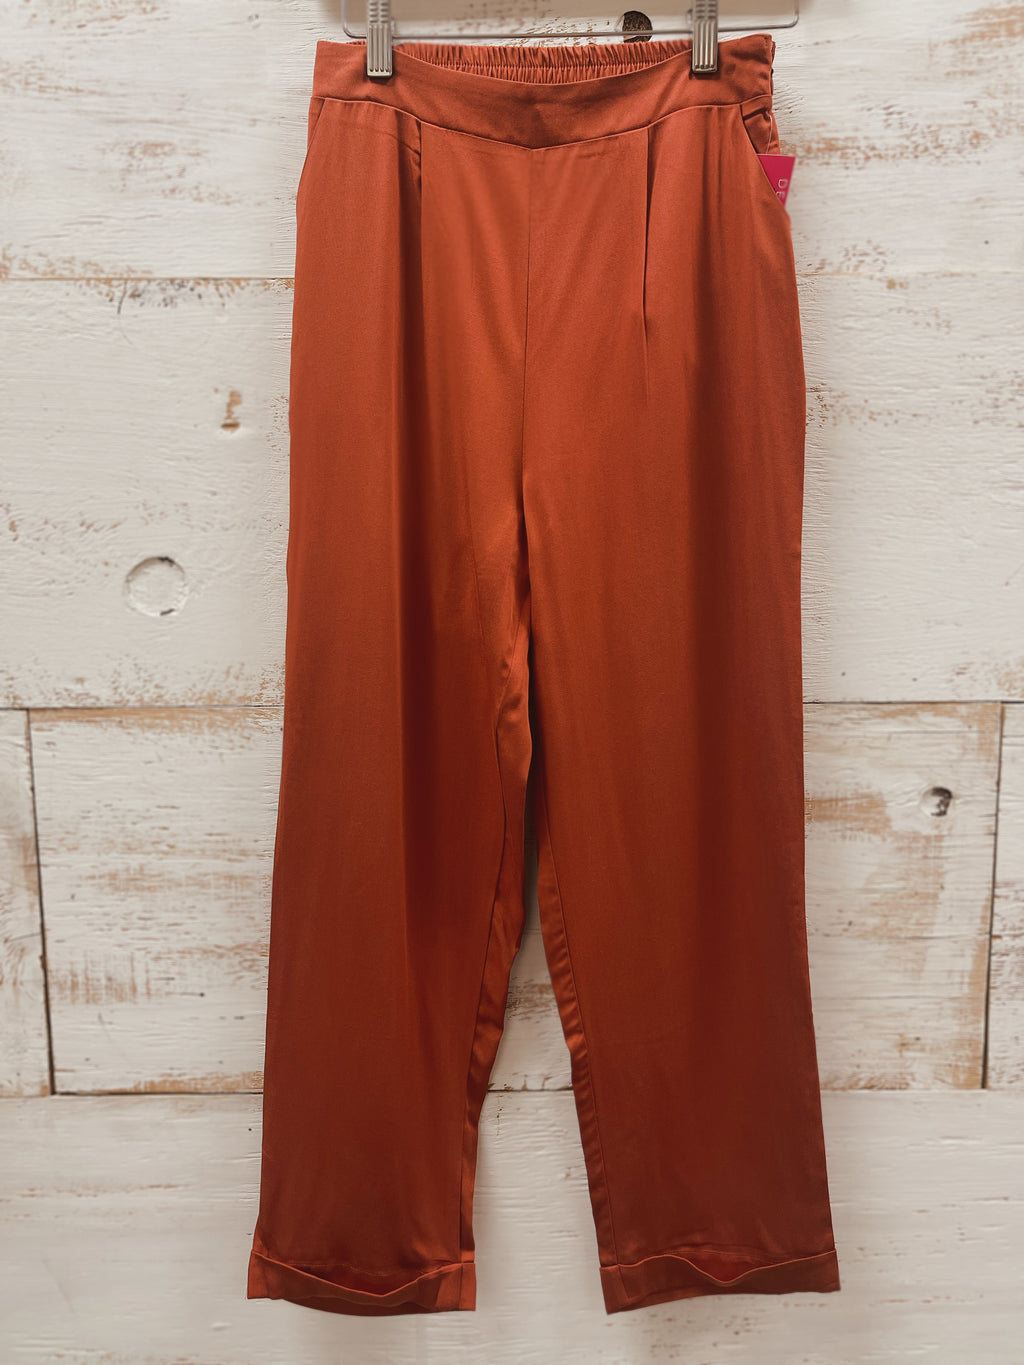 Fall into Place Pants in Rust